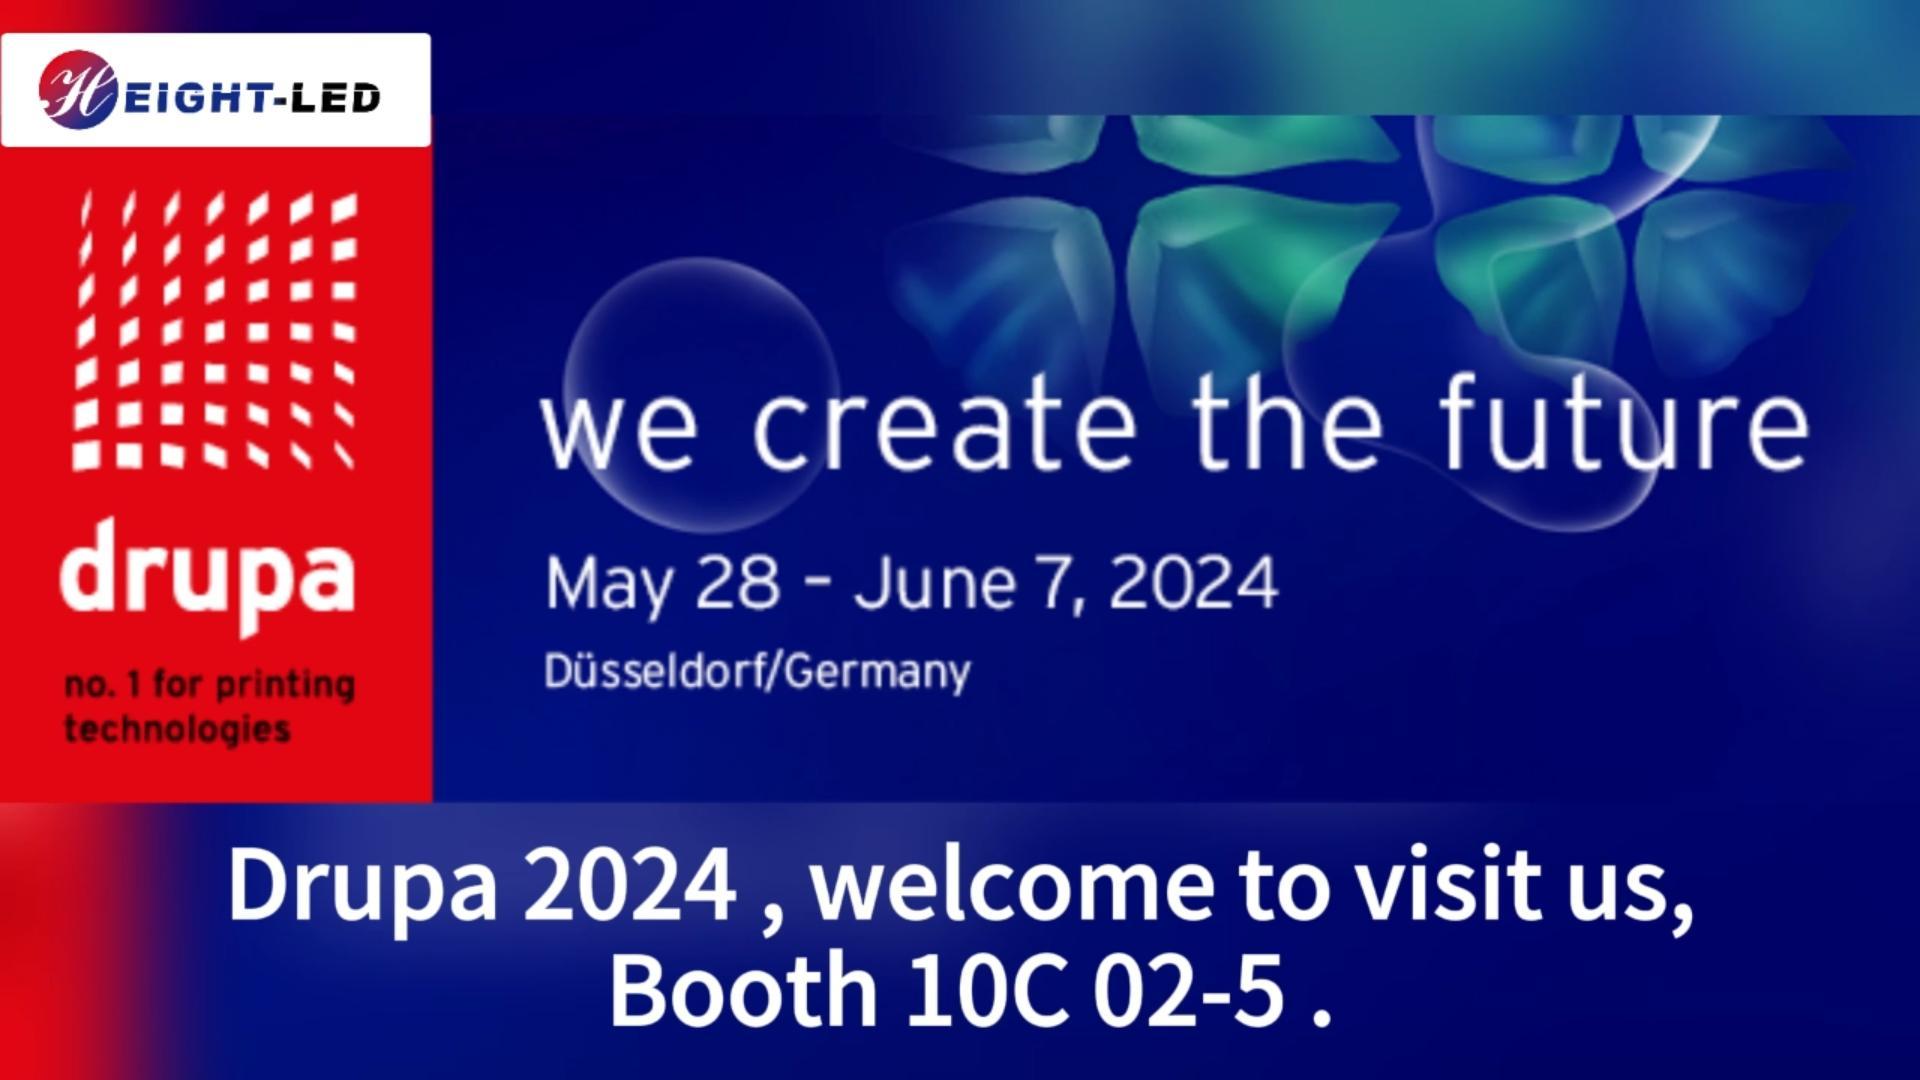 Drupa 2024,welcome to visit us,Booth 10C 02-5